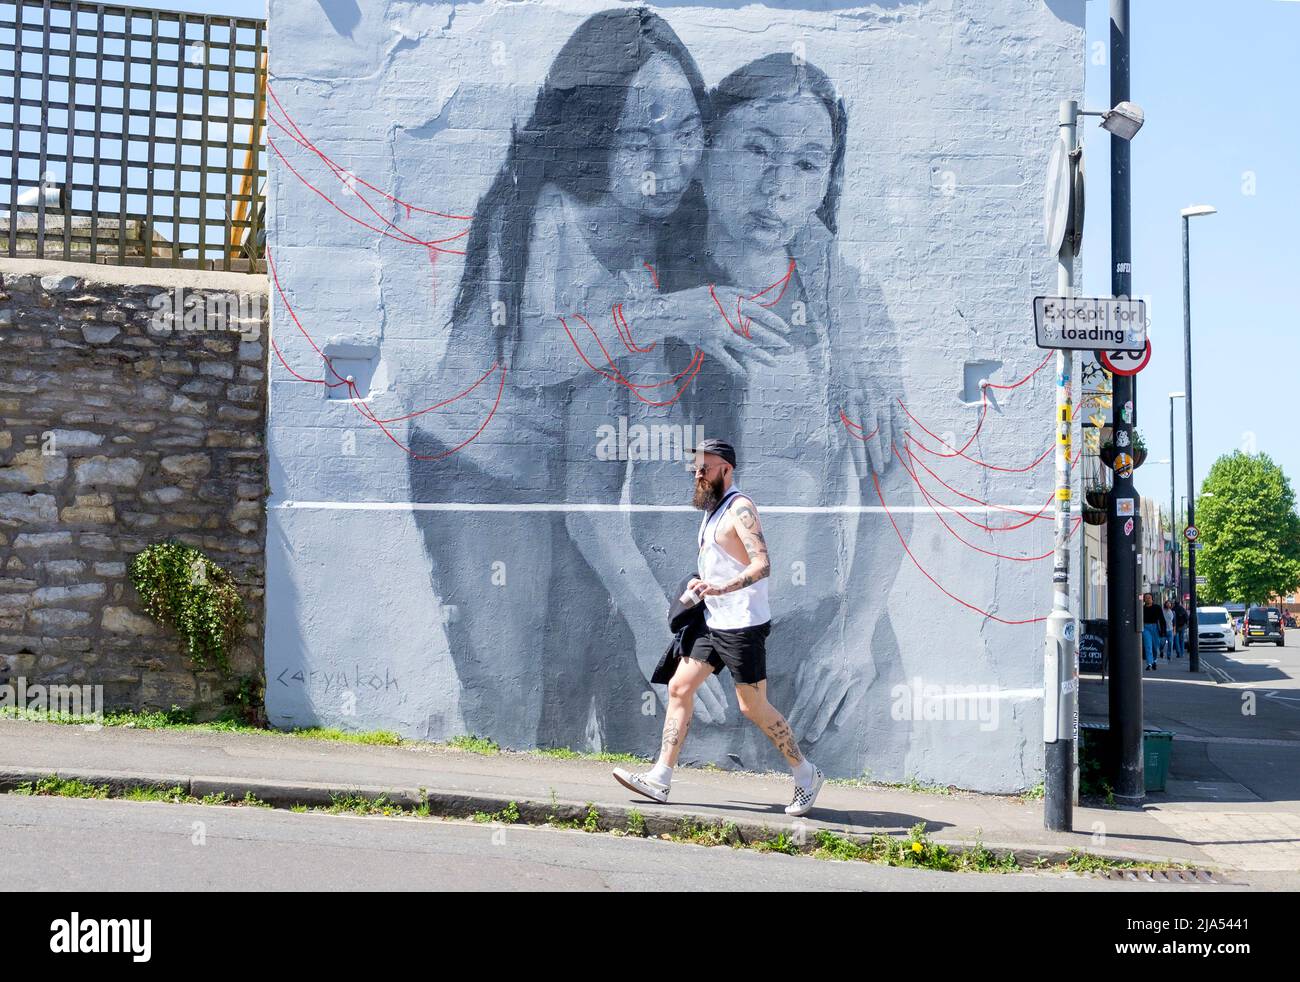 Bristol, UK. 27th May, 2022. Artwork created by UK based Malaysian artist Caryn Koh for the Upfest 2022 festival,Europe's largest Street Art & Graffiti festival is pictured on the streets Bedminster, Bristol. Credit: Lynchpics/Alamy Live News Stock Photo